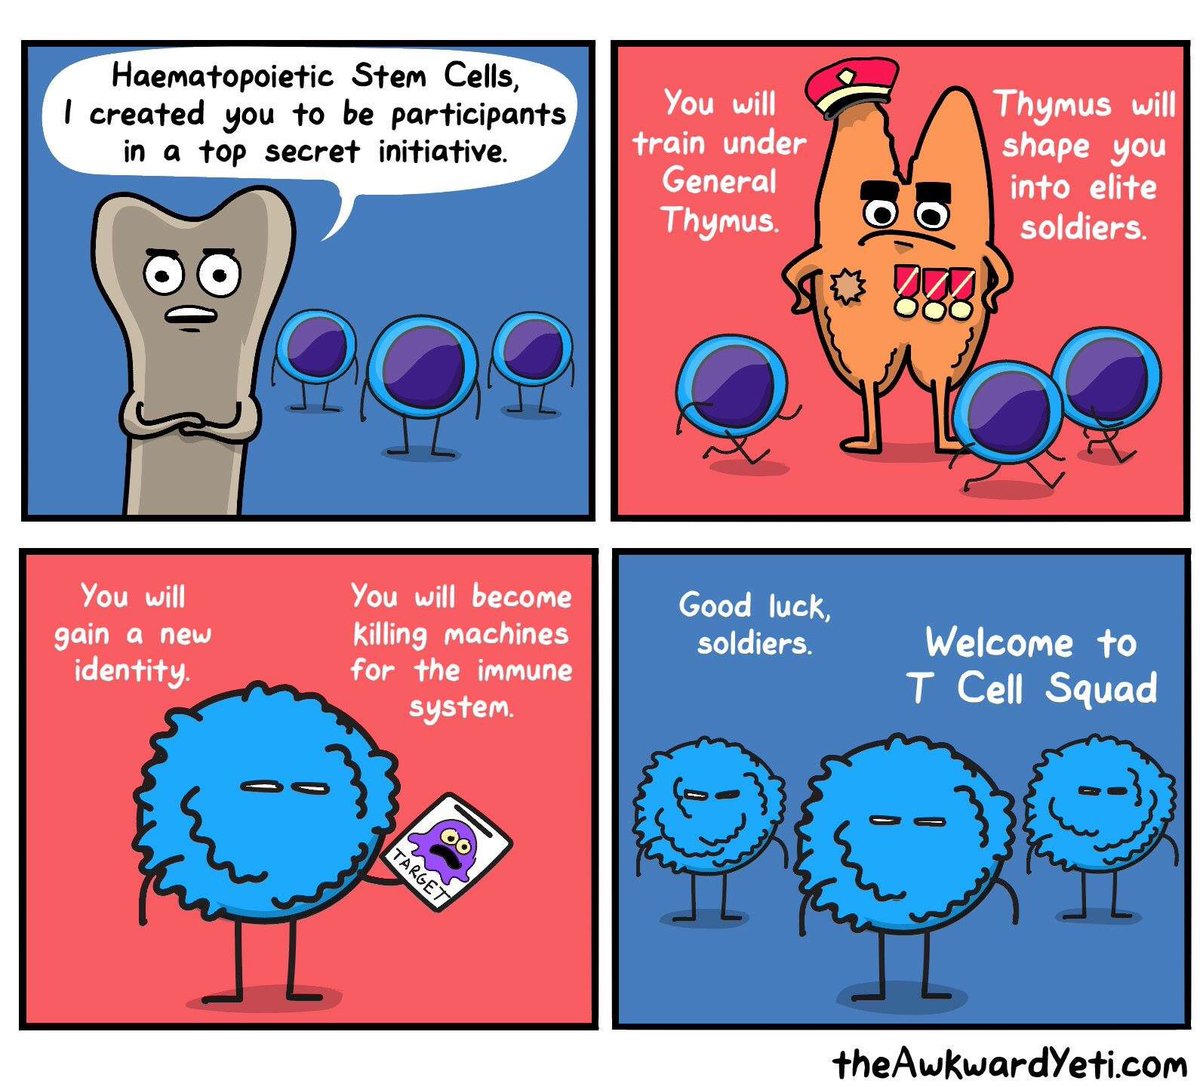 Mighty T cells! Thanks The Awkward Yeti for a great immunology lesson! #immunology #cells #CellDifferentiation #squad